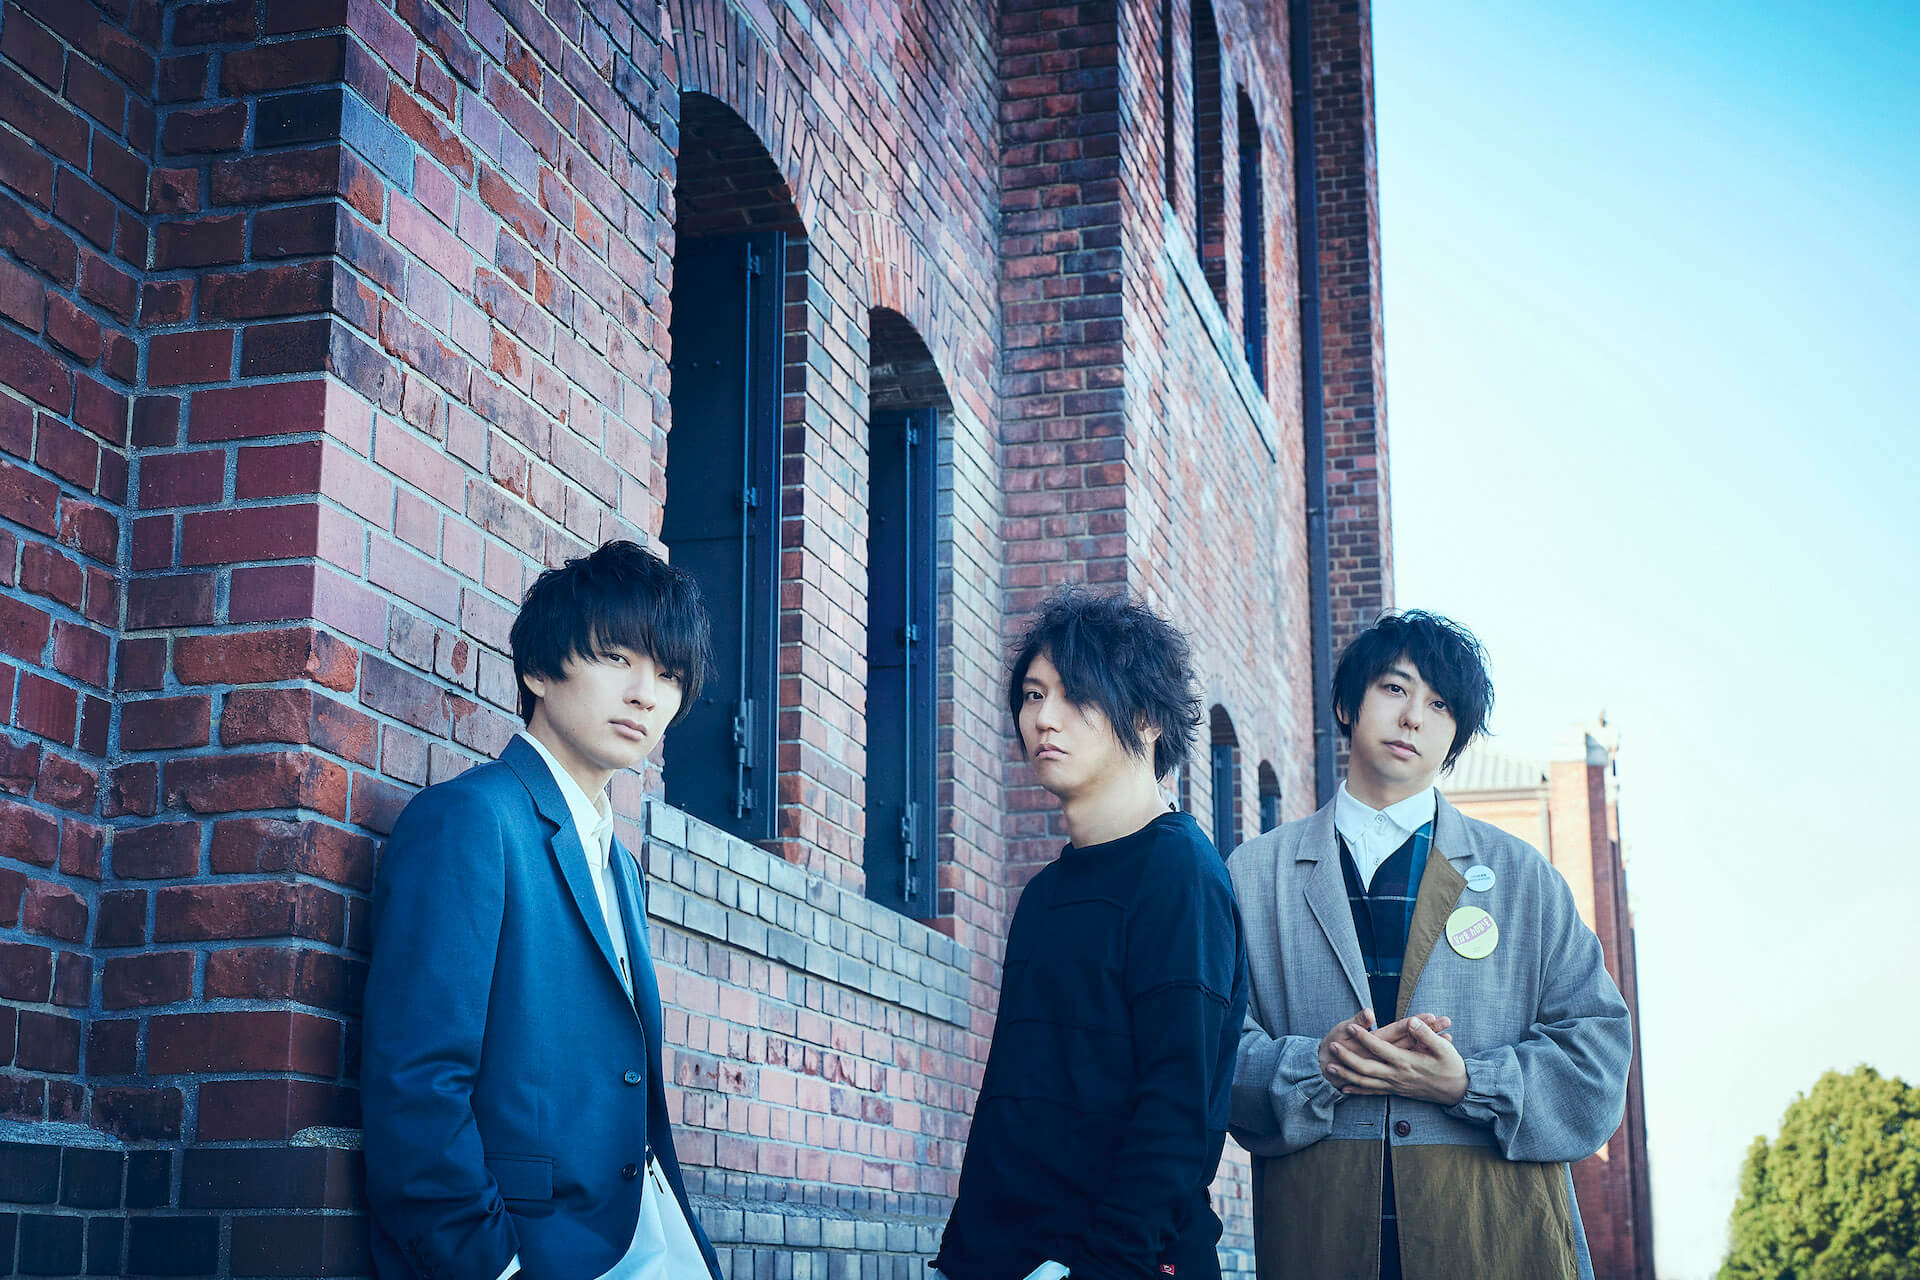 UNISON SQUARE GARDEN、MAN WITH A MISSIONが出演！地域貢献に繋がる音楽ライブ＜音楽と行こう by au 5G LIVE＞の開催迫る！ music220318_live-ongakutoikou-04